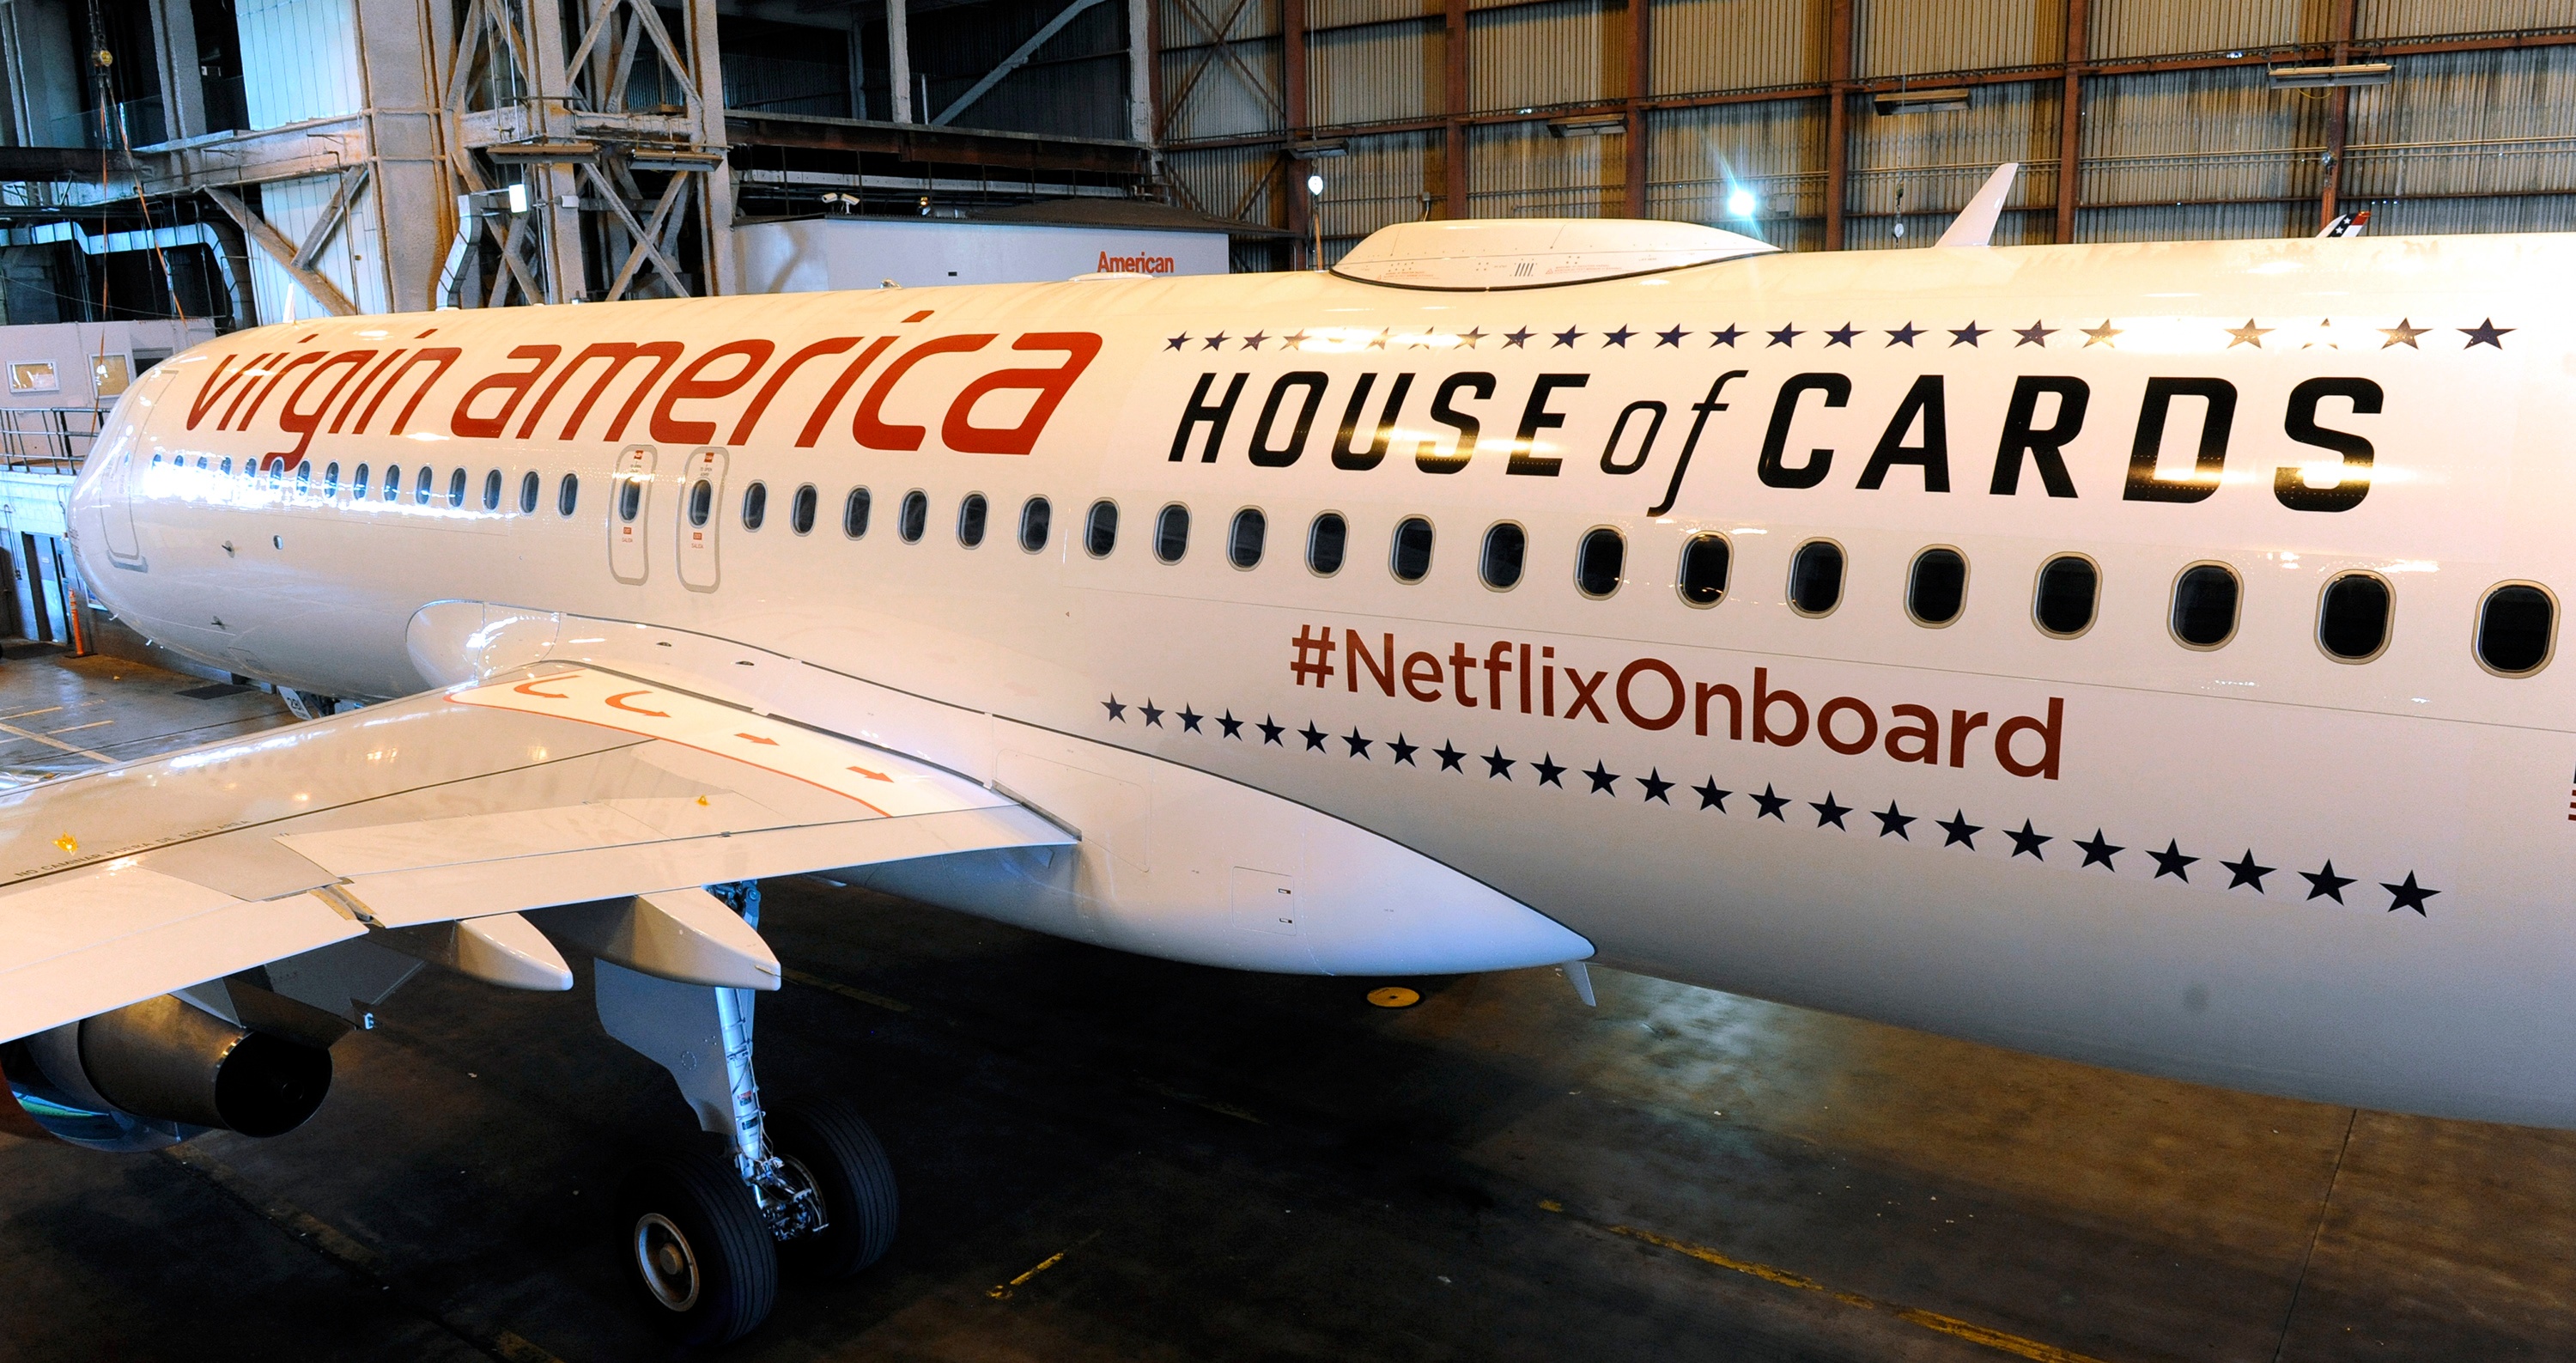 Virgin America Airlines and Netflix partner to offer 'next generation entertainment' on board 10 VA Airbus A320 Aircrafts. As part of their in-flight entertainment, flyers can access high-speed WiFi, and have unlimited access to the entire Netflix catalogue through their personal devices.- Netflix/Virgin America Flight